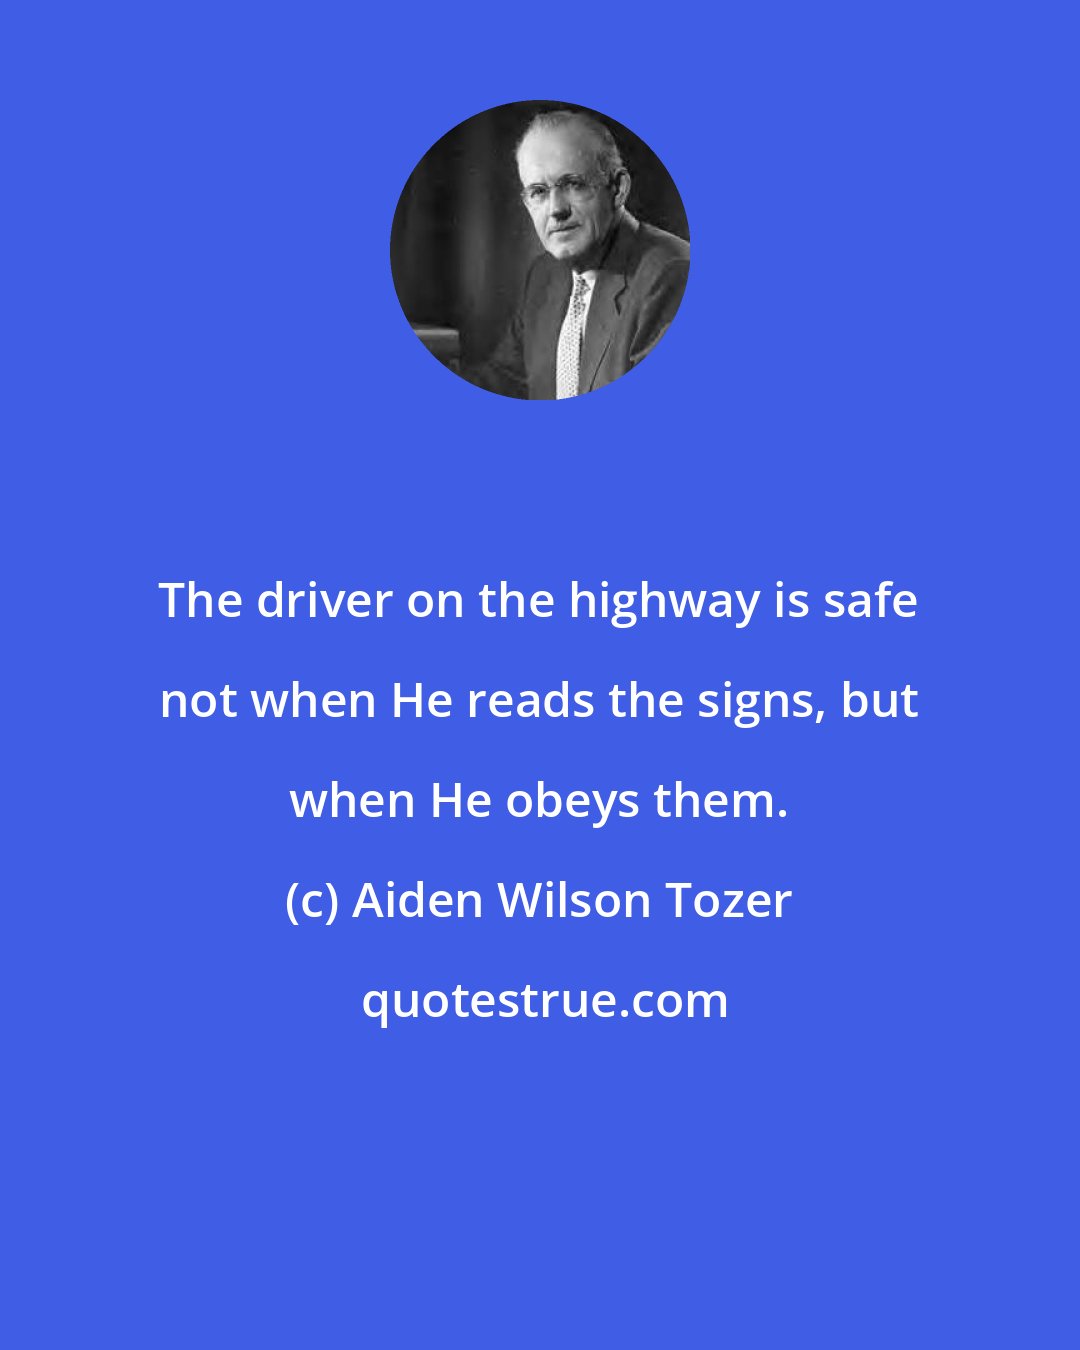 Aiden Wilson Tozer: The driver on the highway is safe not when He reads the signs, but when He obeys them.